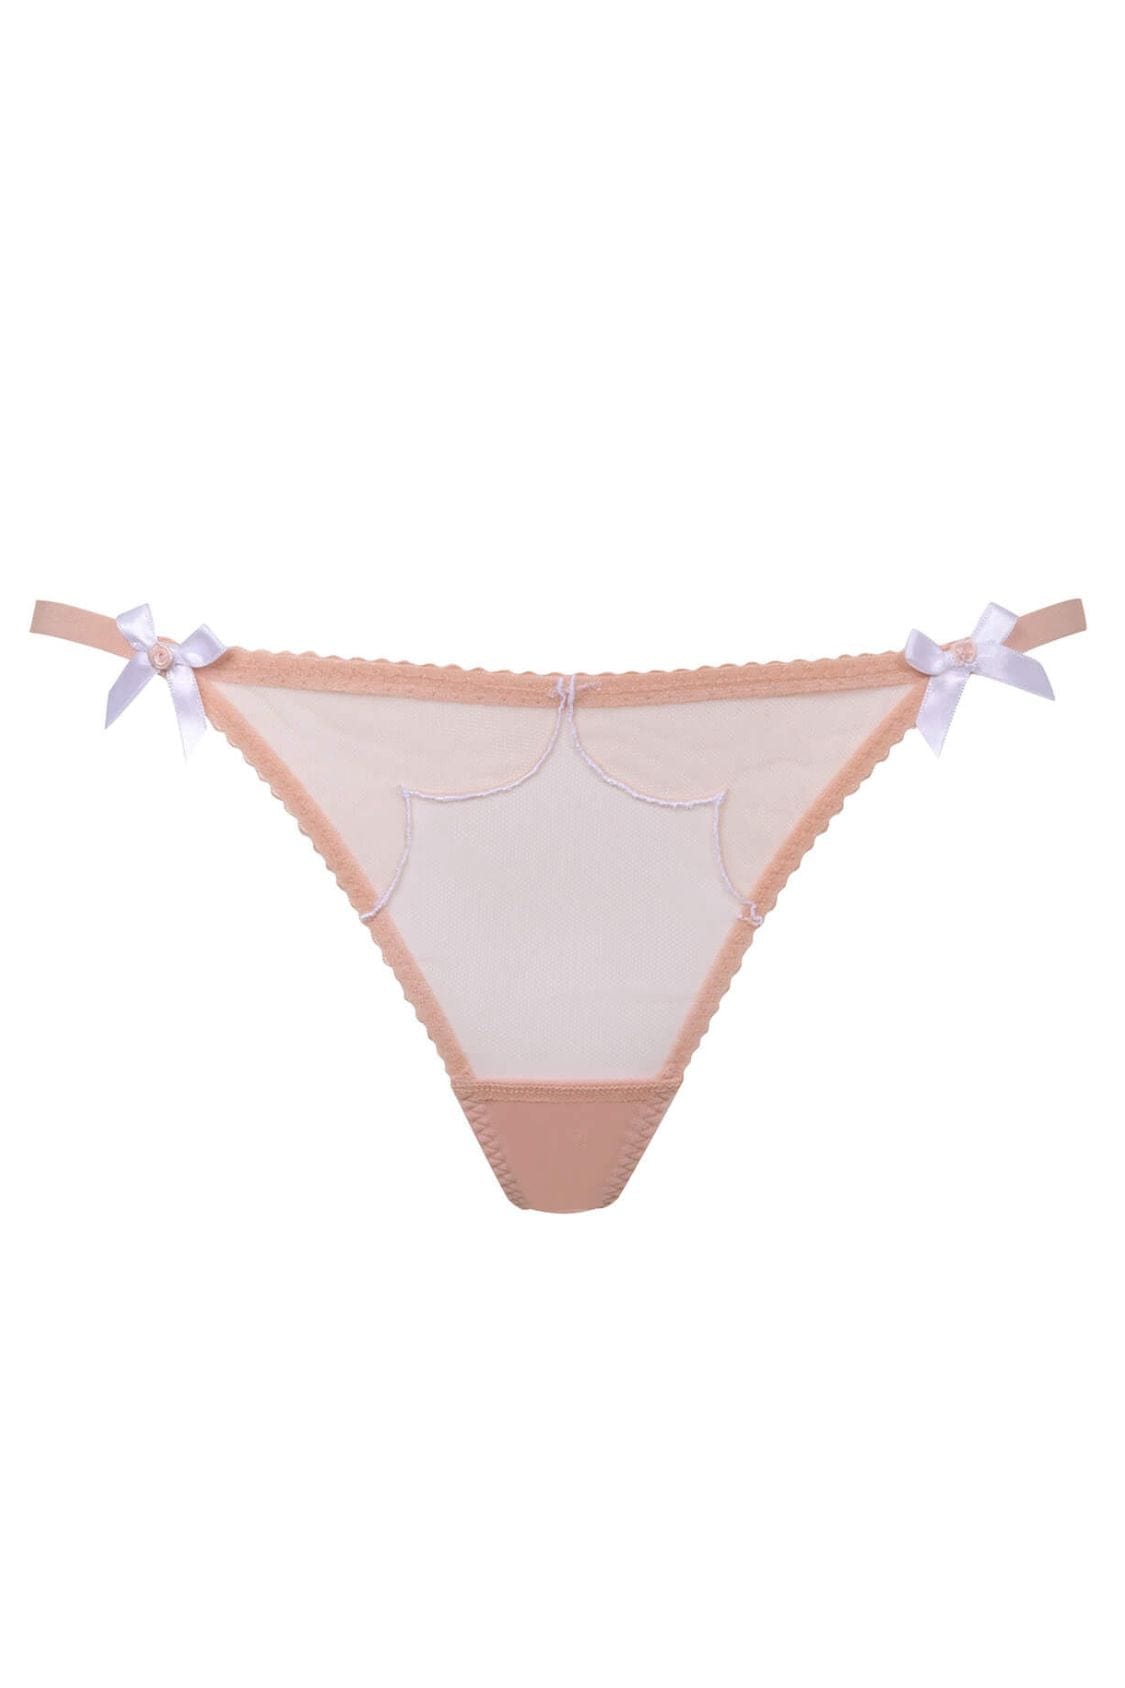 Agent Provocateur Thong Lorna Thong - Sand/White